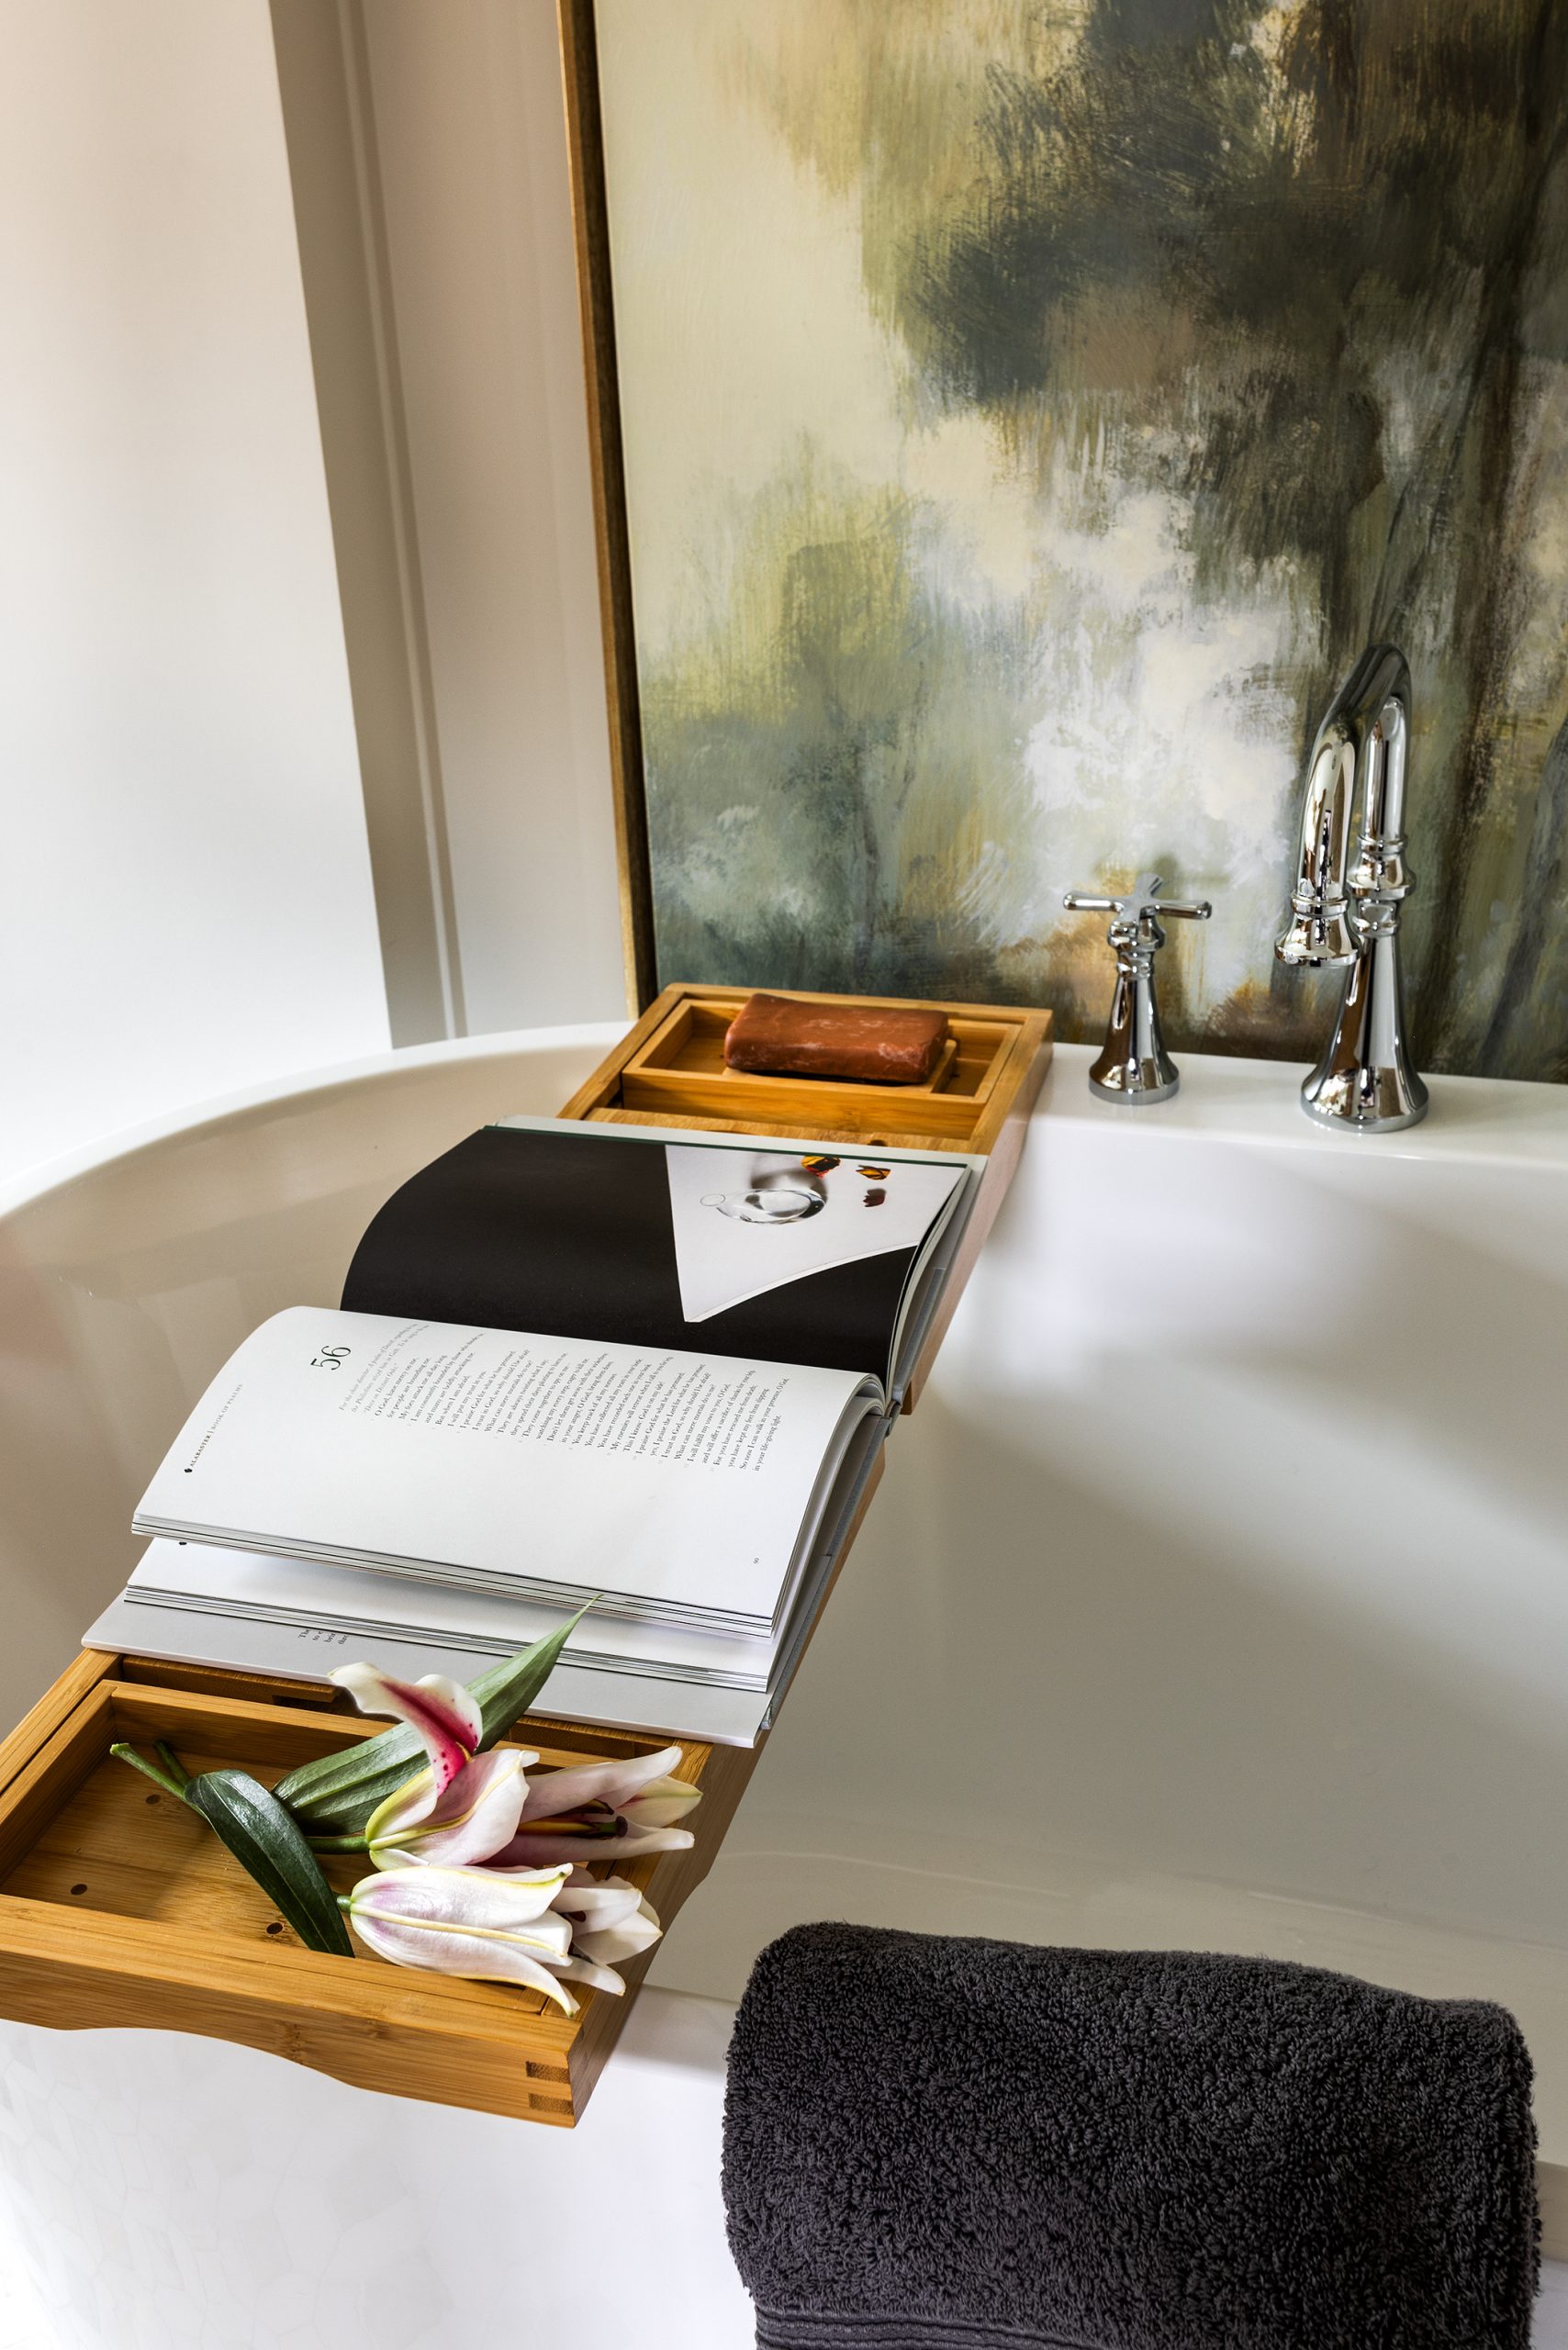 Dark mahogany double doors connect the primary bedroom suite to the bath, opening to a soaking tub that perches beneath a tall abstract painting.
